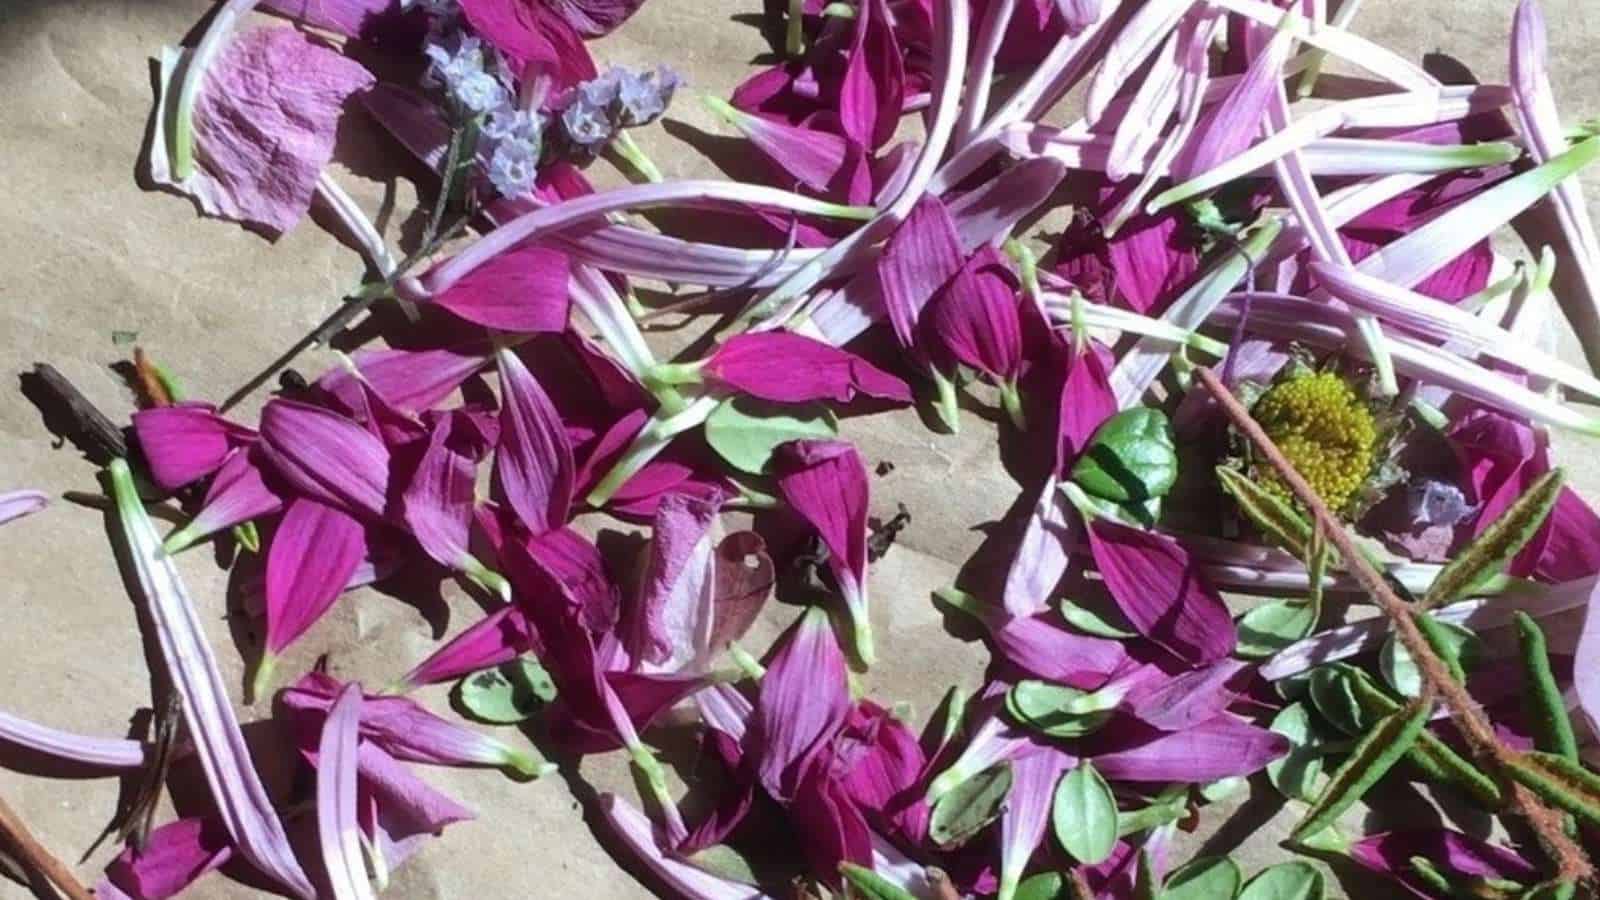 A bunch of dried purple flowers on a piece of paper.